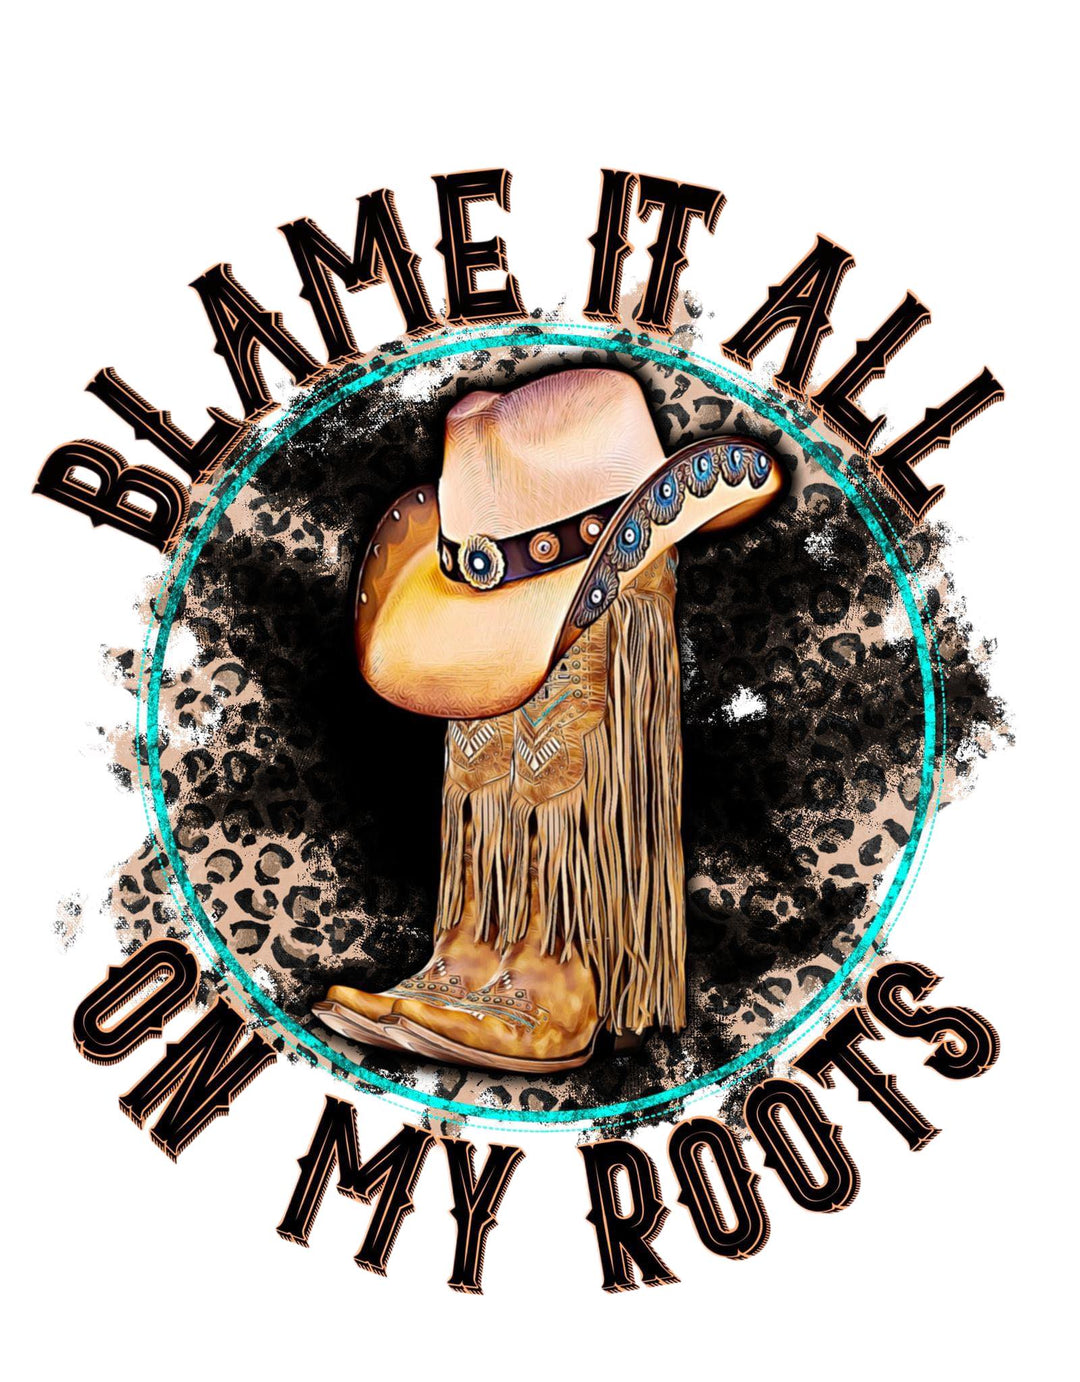 20 oz Skinny Tumbler - Blame it All on My Roots